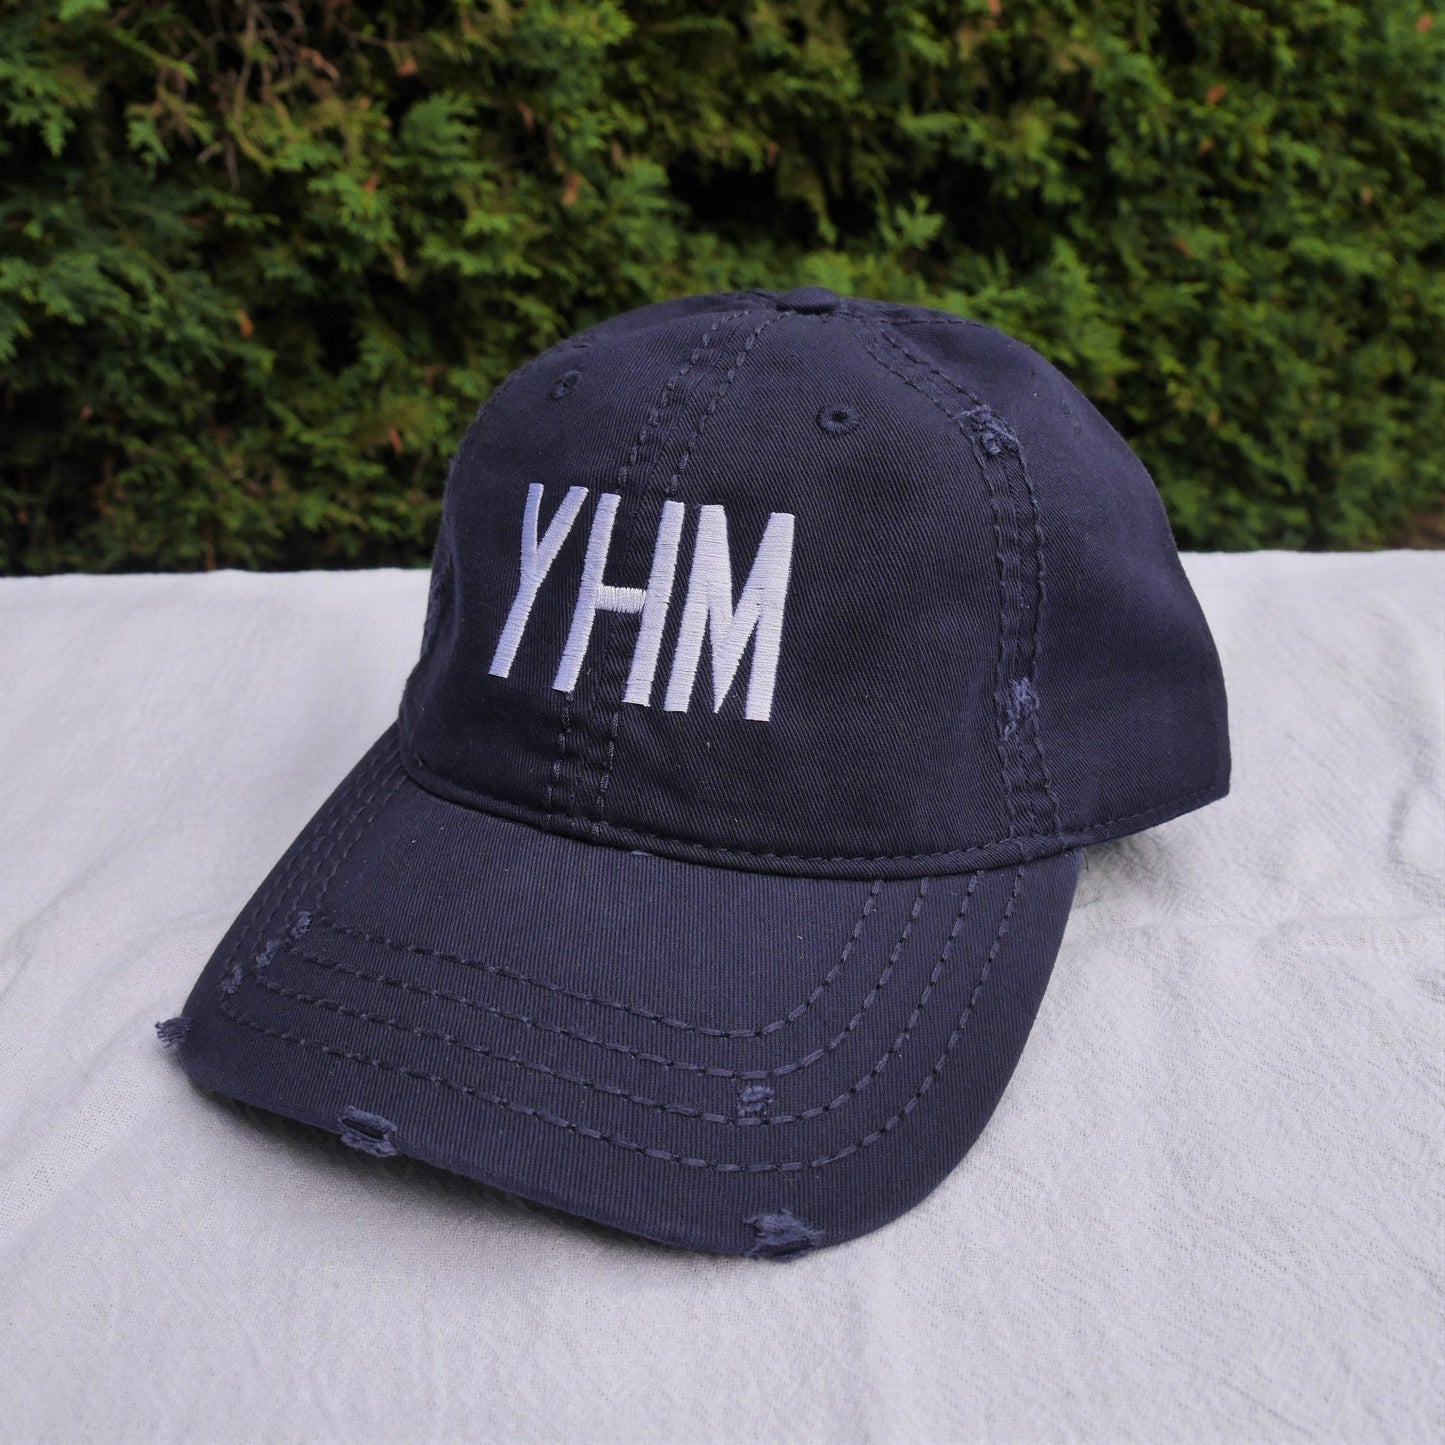 Airport Code Twill Cap - White • YCM St. Catharines • YHM Designs - Image 34